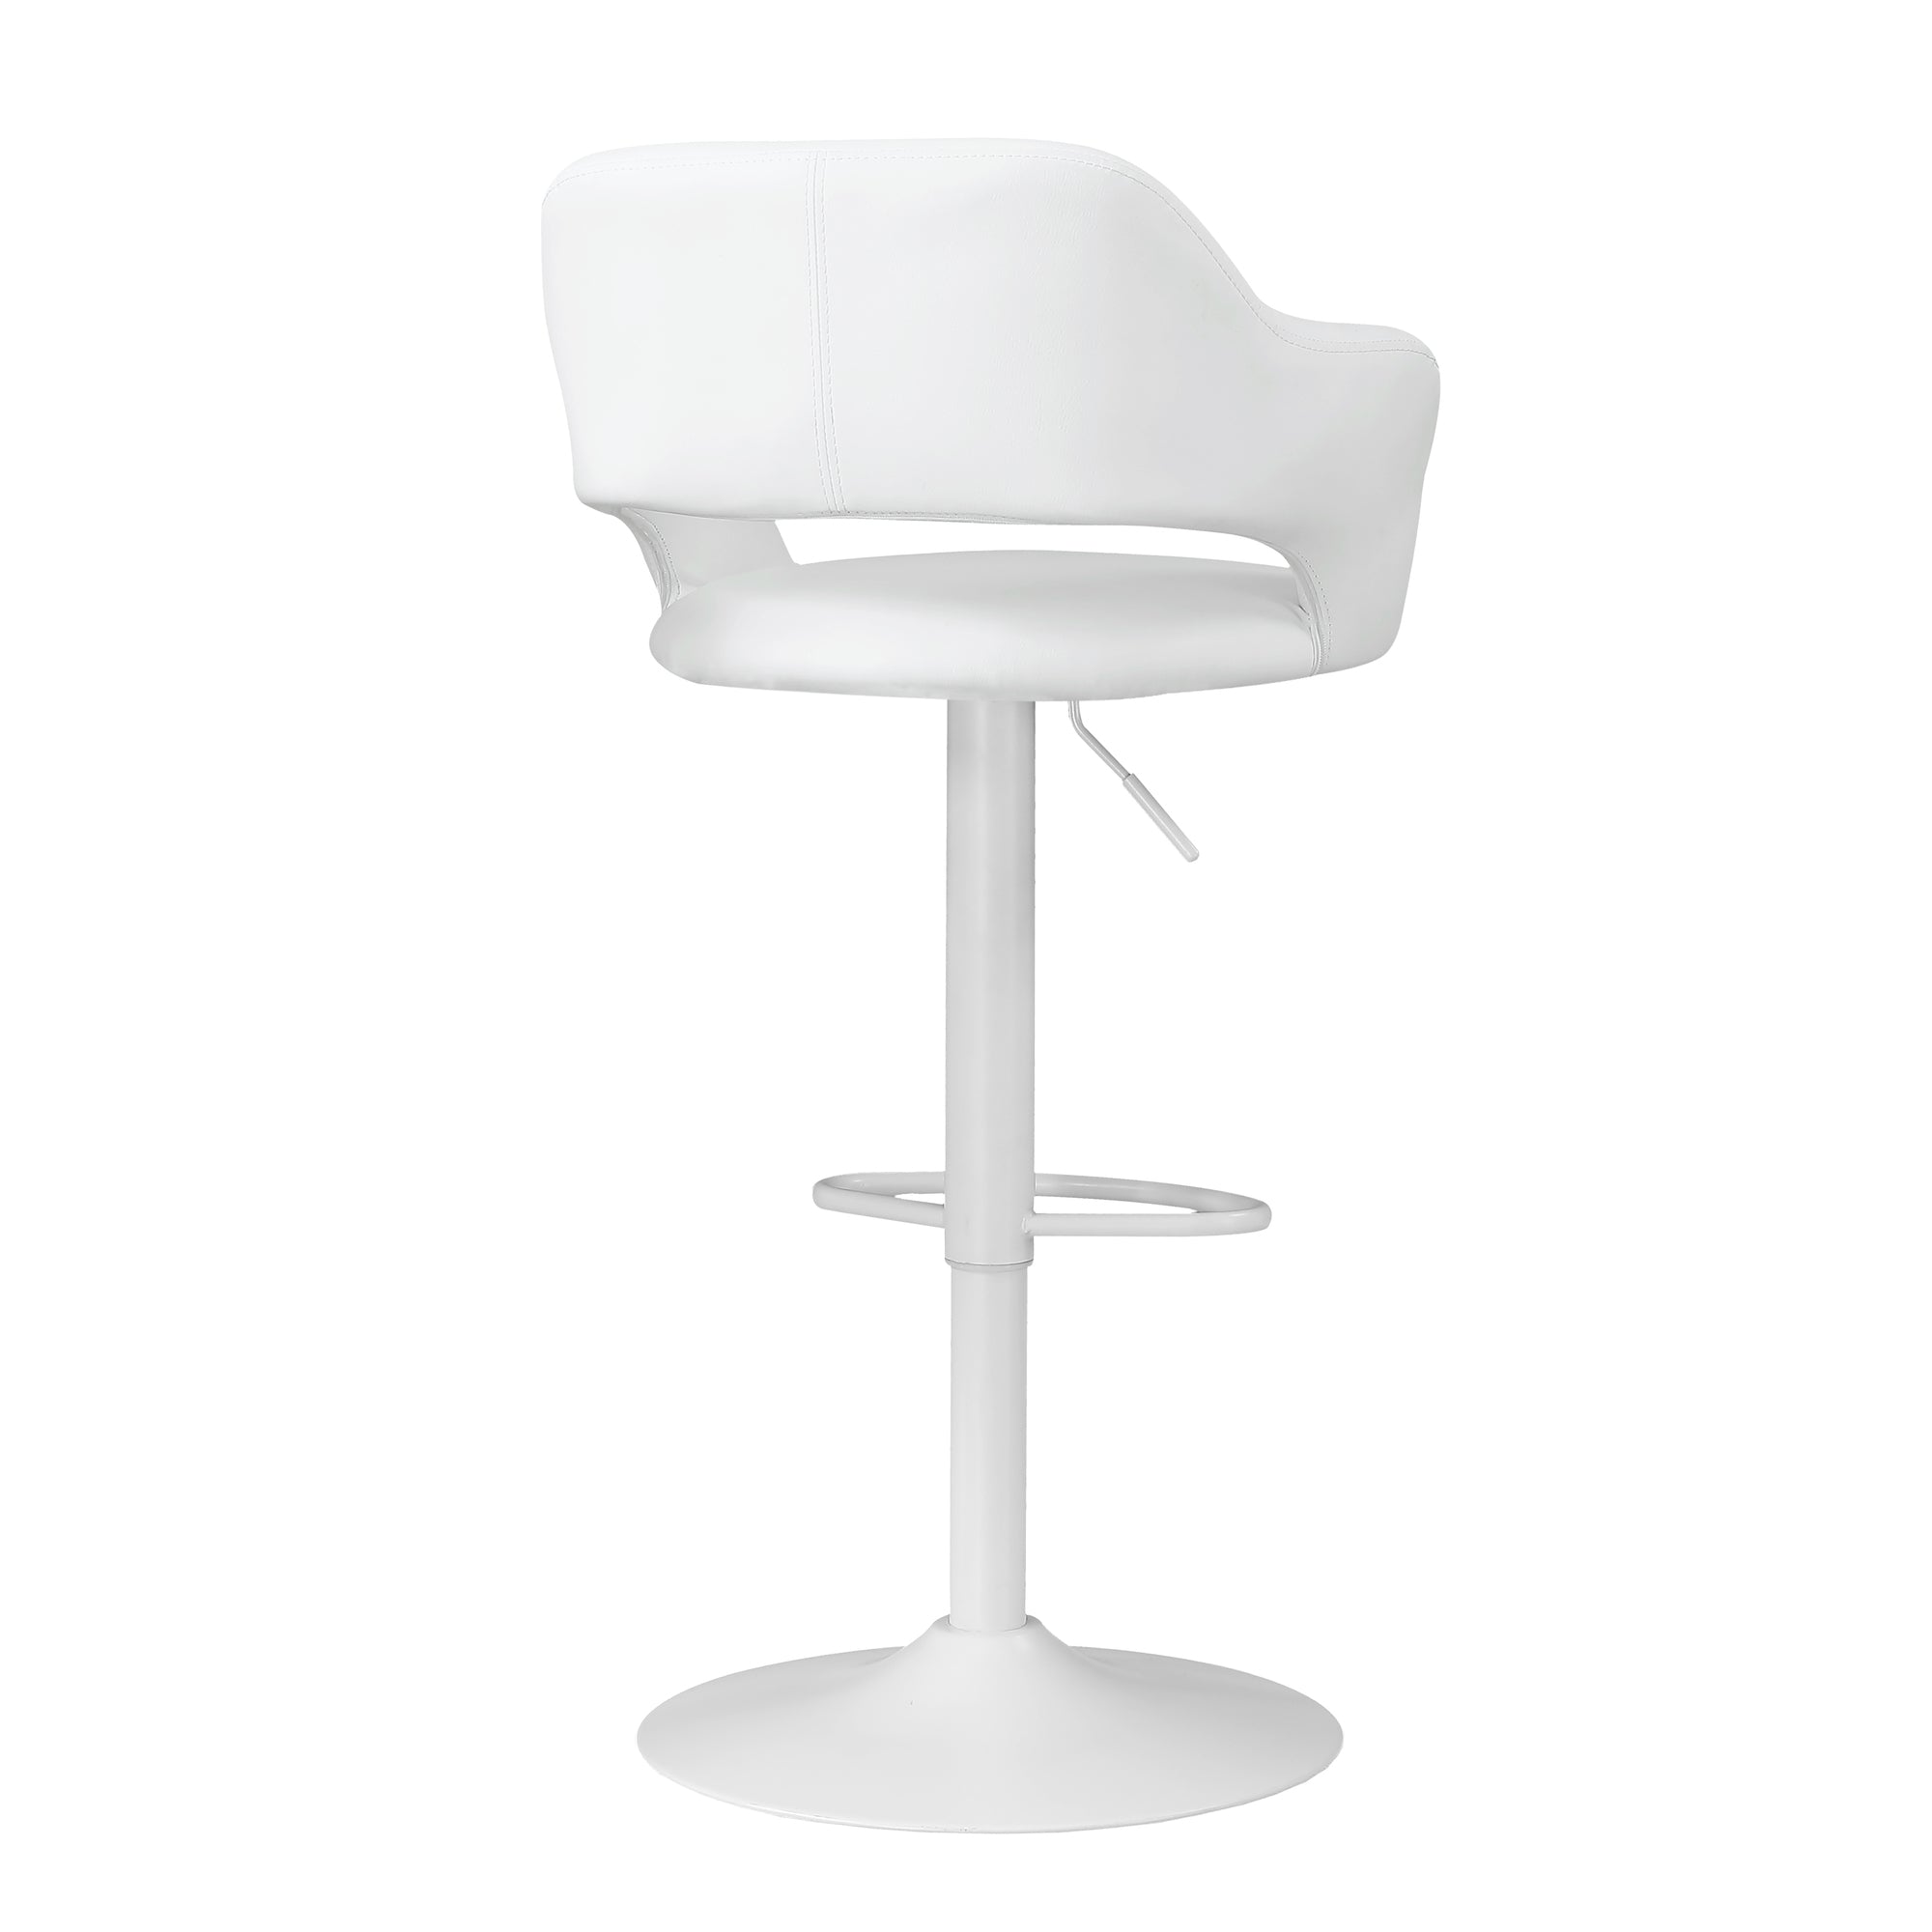 MN-862382    Bar Stool, Swivel, Bar Height, Adjustable, Metal, Leather Look, White, Contemporary, Modern